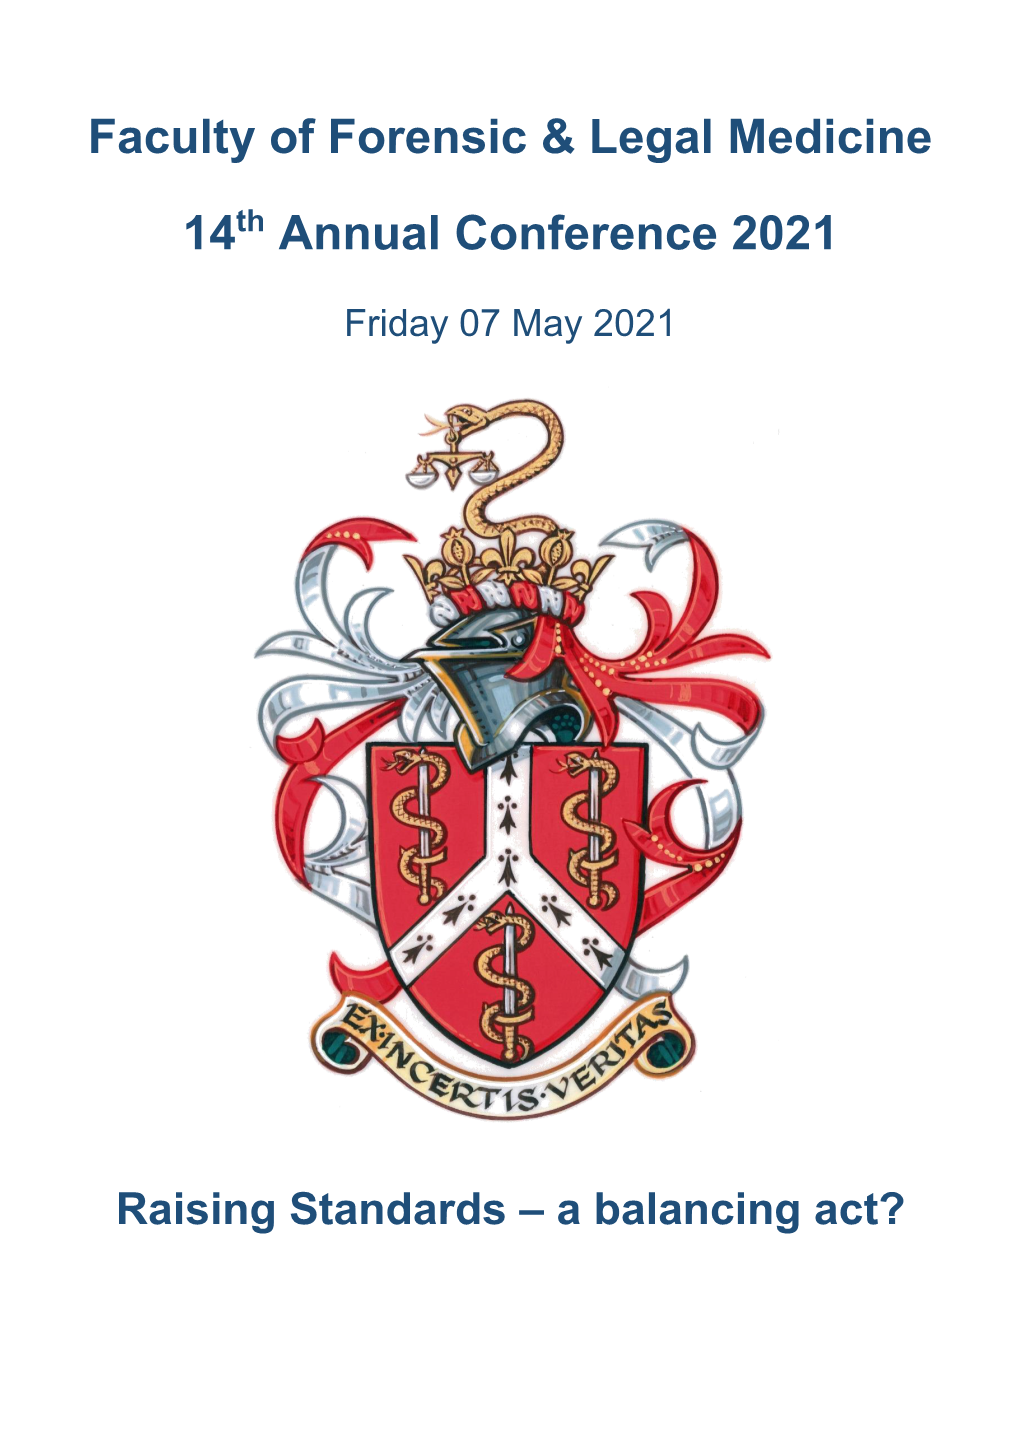 Faculty of Forensic & Legal Medicine 14 Annual Conference 2021